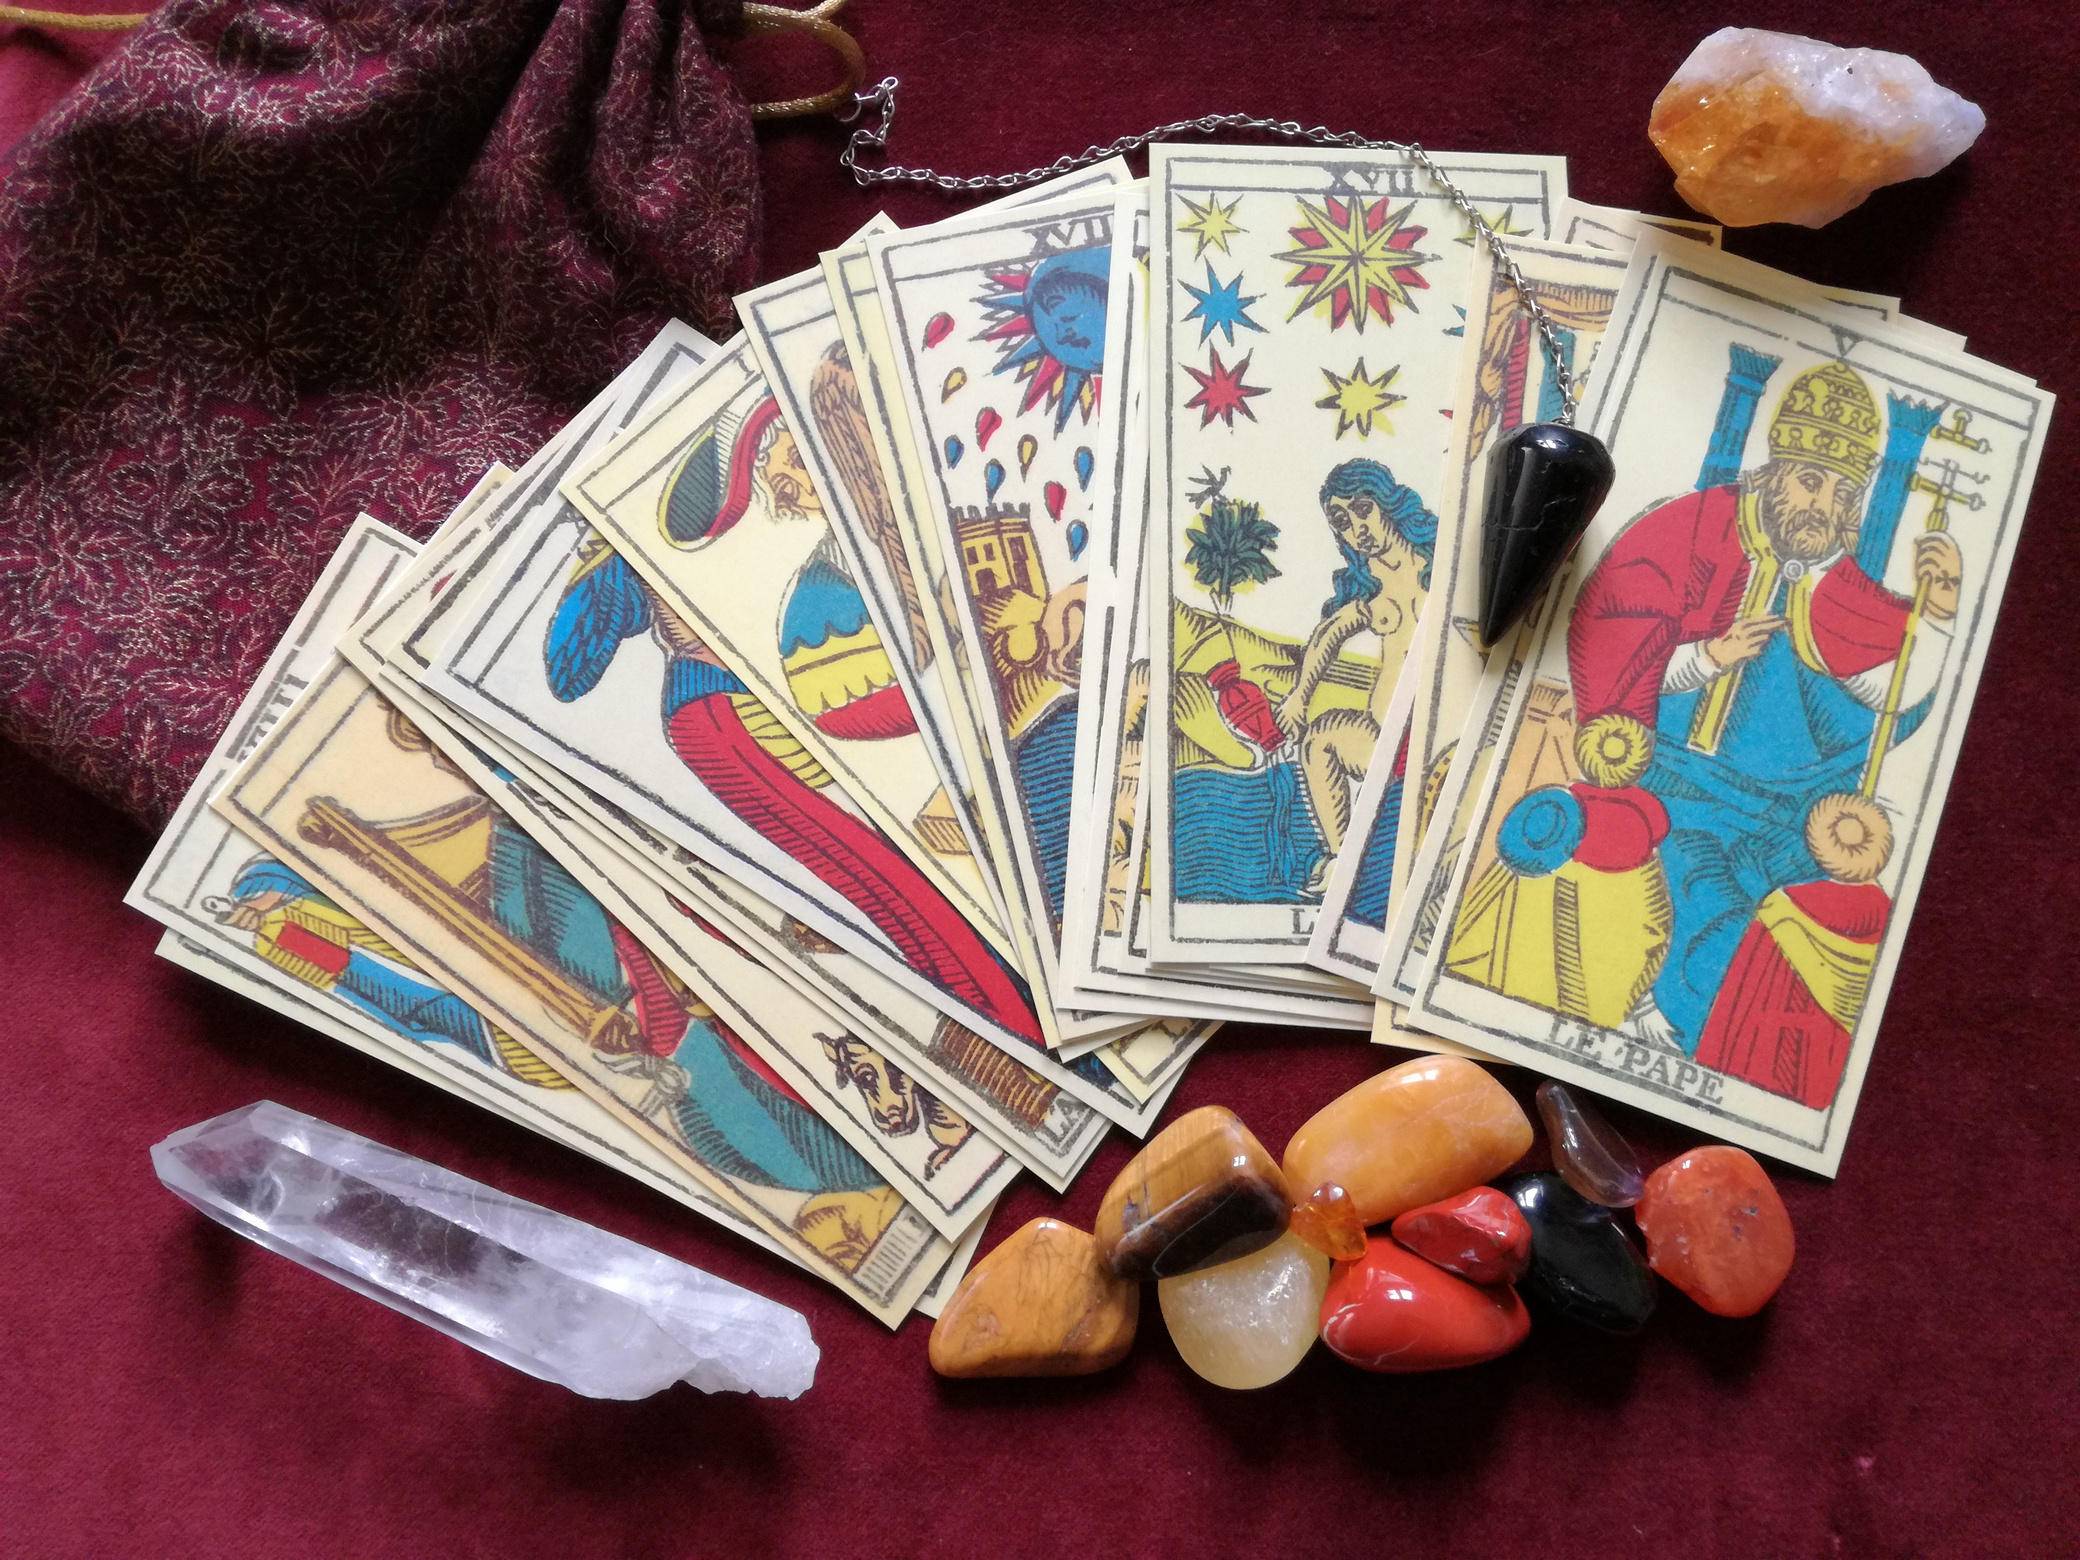 Psychic Tarot Cards and Crystals